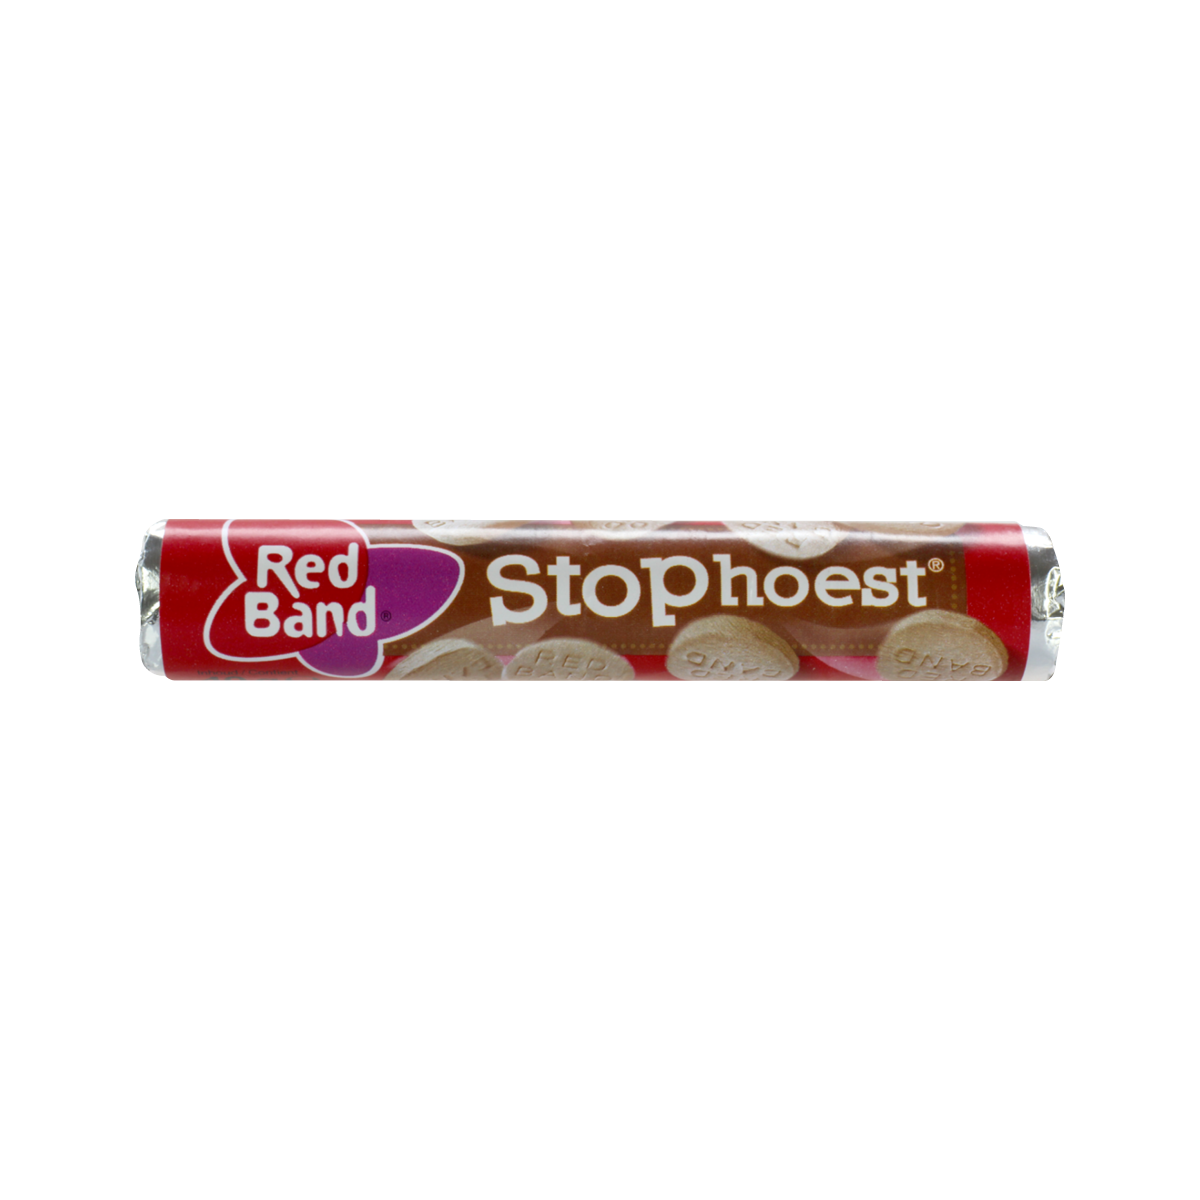 Red Band Stophoest / Cough Lozenges 4 pack